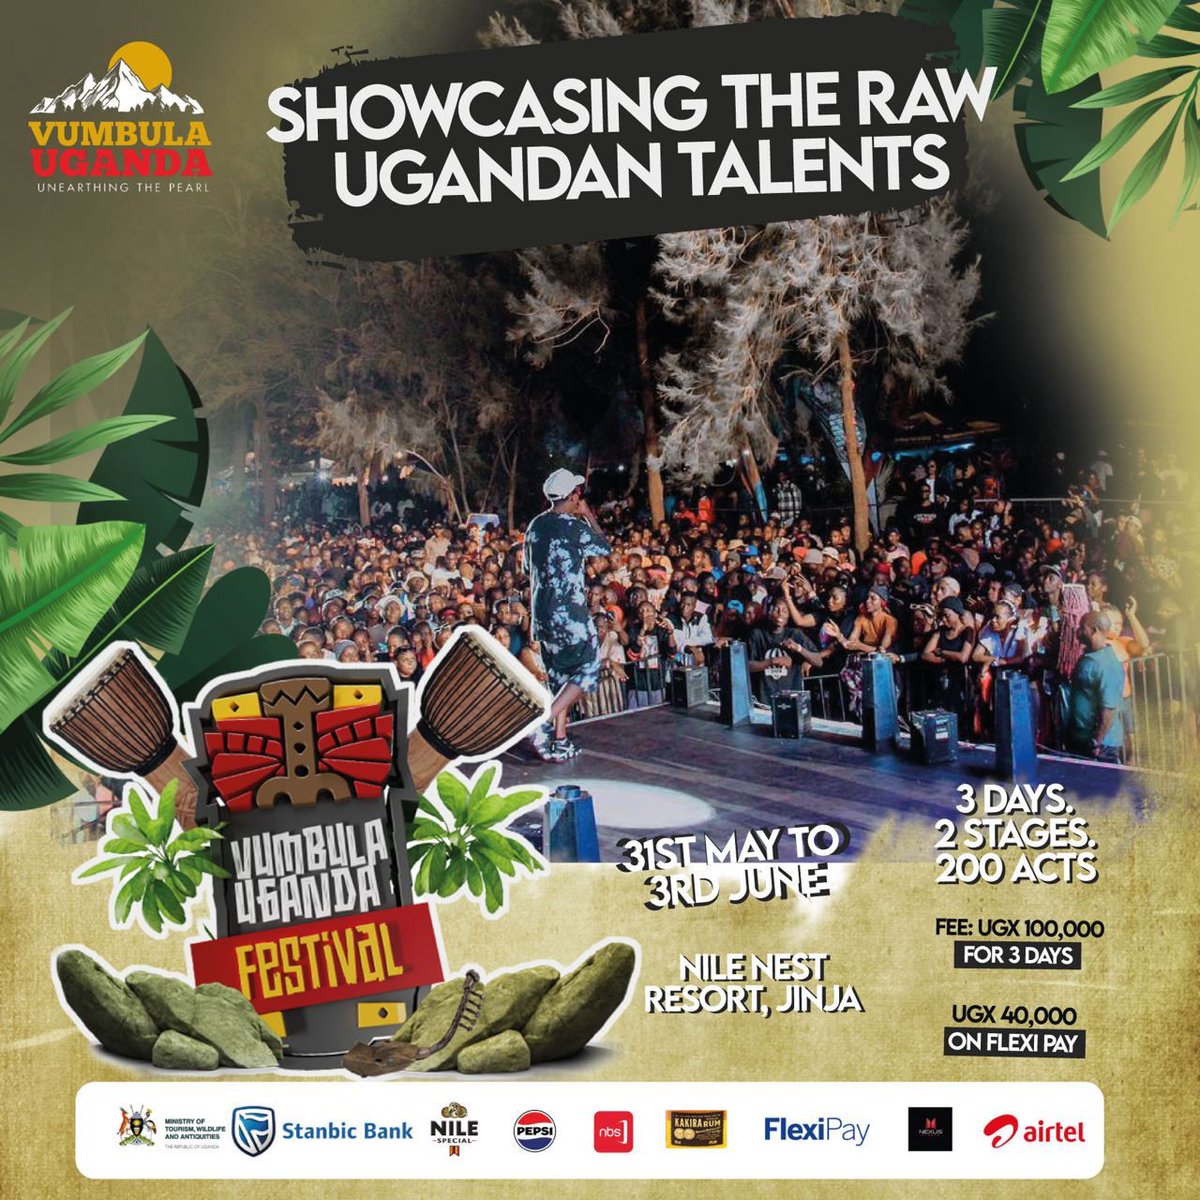 Nile Nest Resort in Jinja is calling from 31st May to 3rd June, 2024. The #VumbulaUgandaFestival offers stunning scenery & epic fun. Buy a discounted ticket on Flexi Pay at UGX 40,000 only. #GreeningTheNile #NBSUpdates